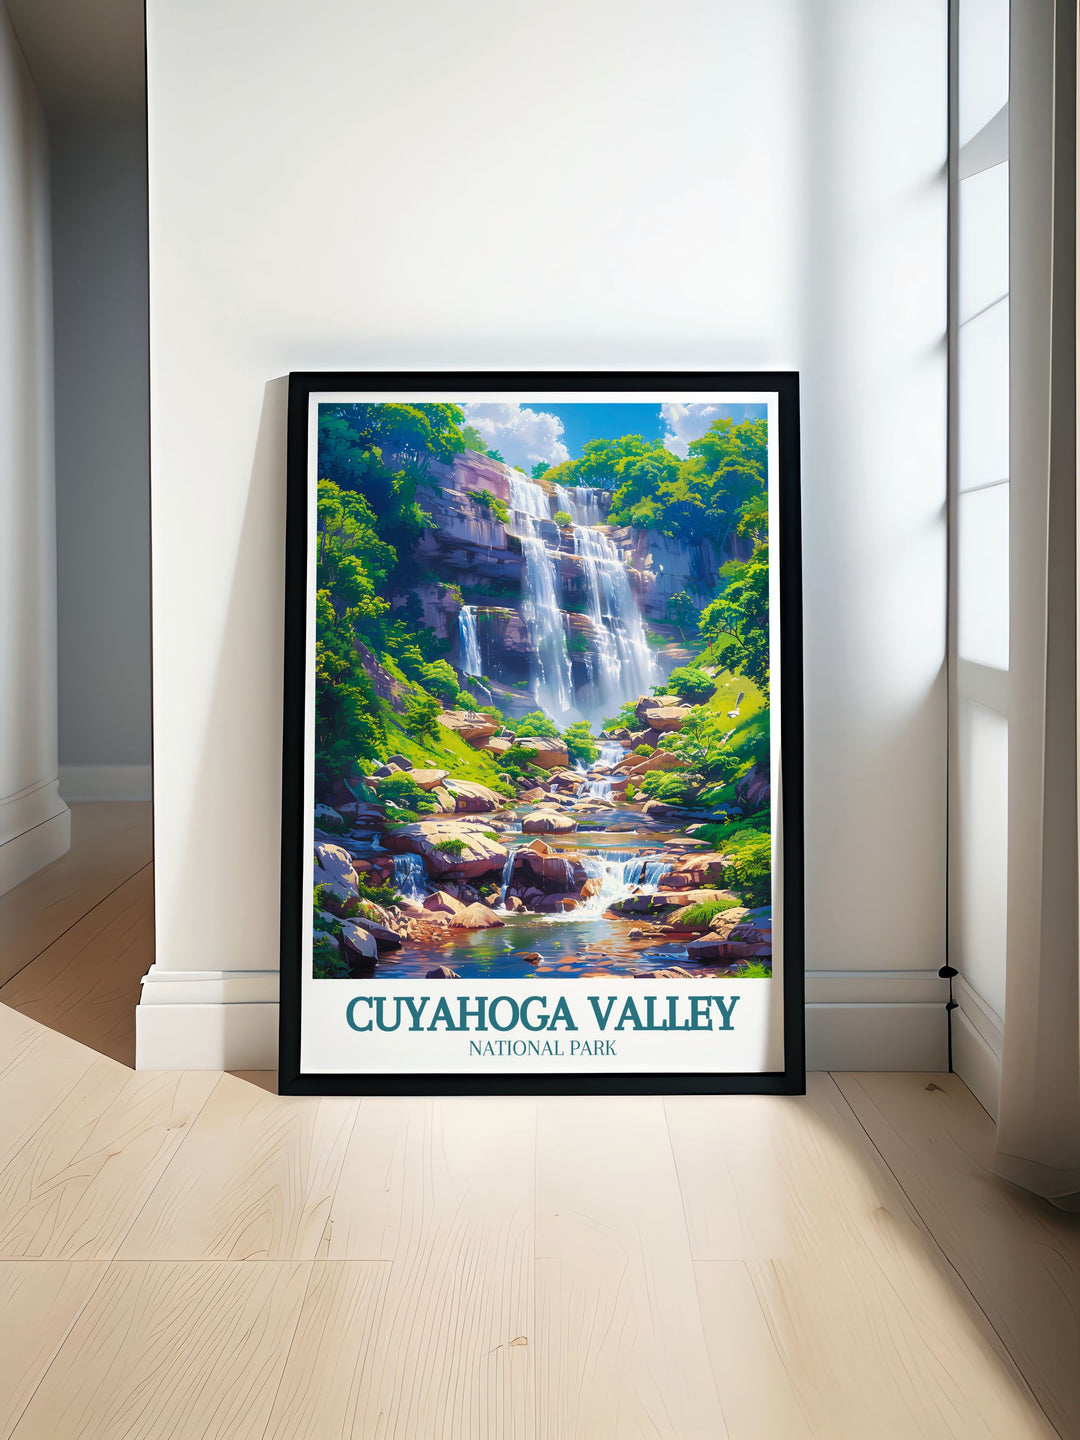 Celebrate the charm of Cuyahoga Valley with this high quality art print, featuring the historic Ohio & Erie Canal Towpath Trail and lush surroundings, ideal for home decor.